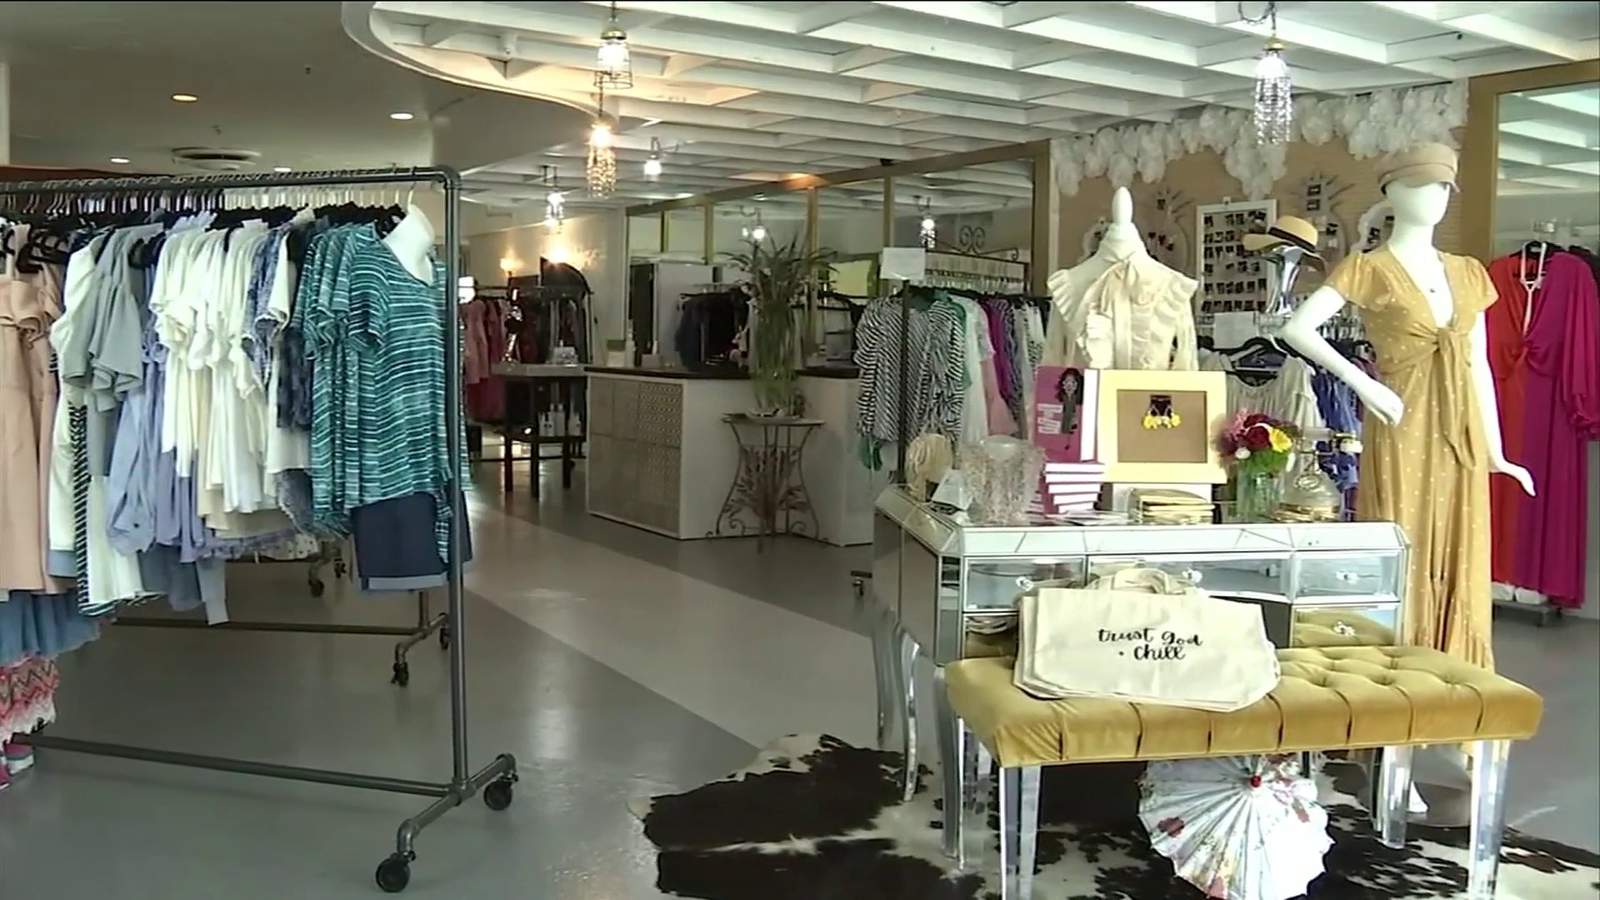 Jacksonville business owner wants everyone to feel welcome at her boutique